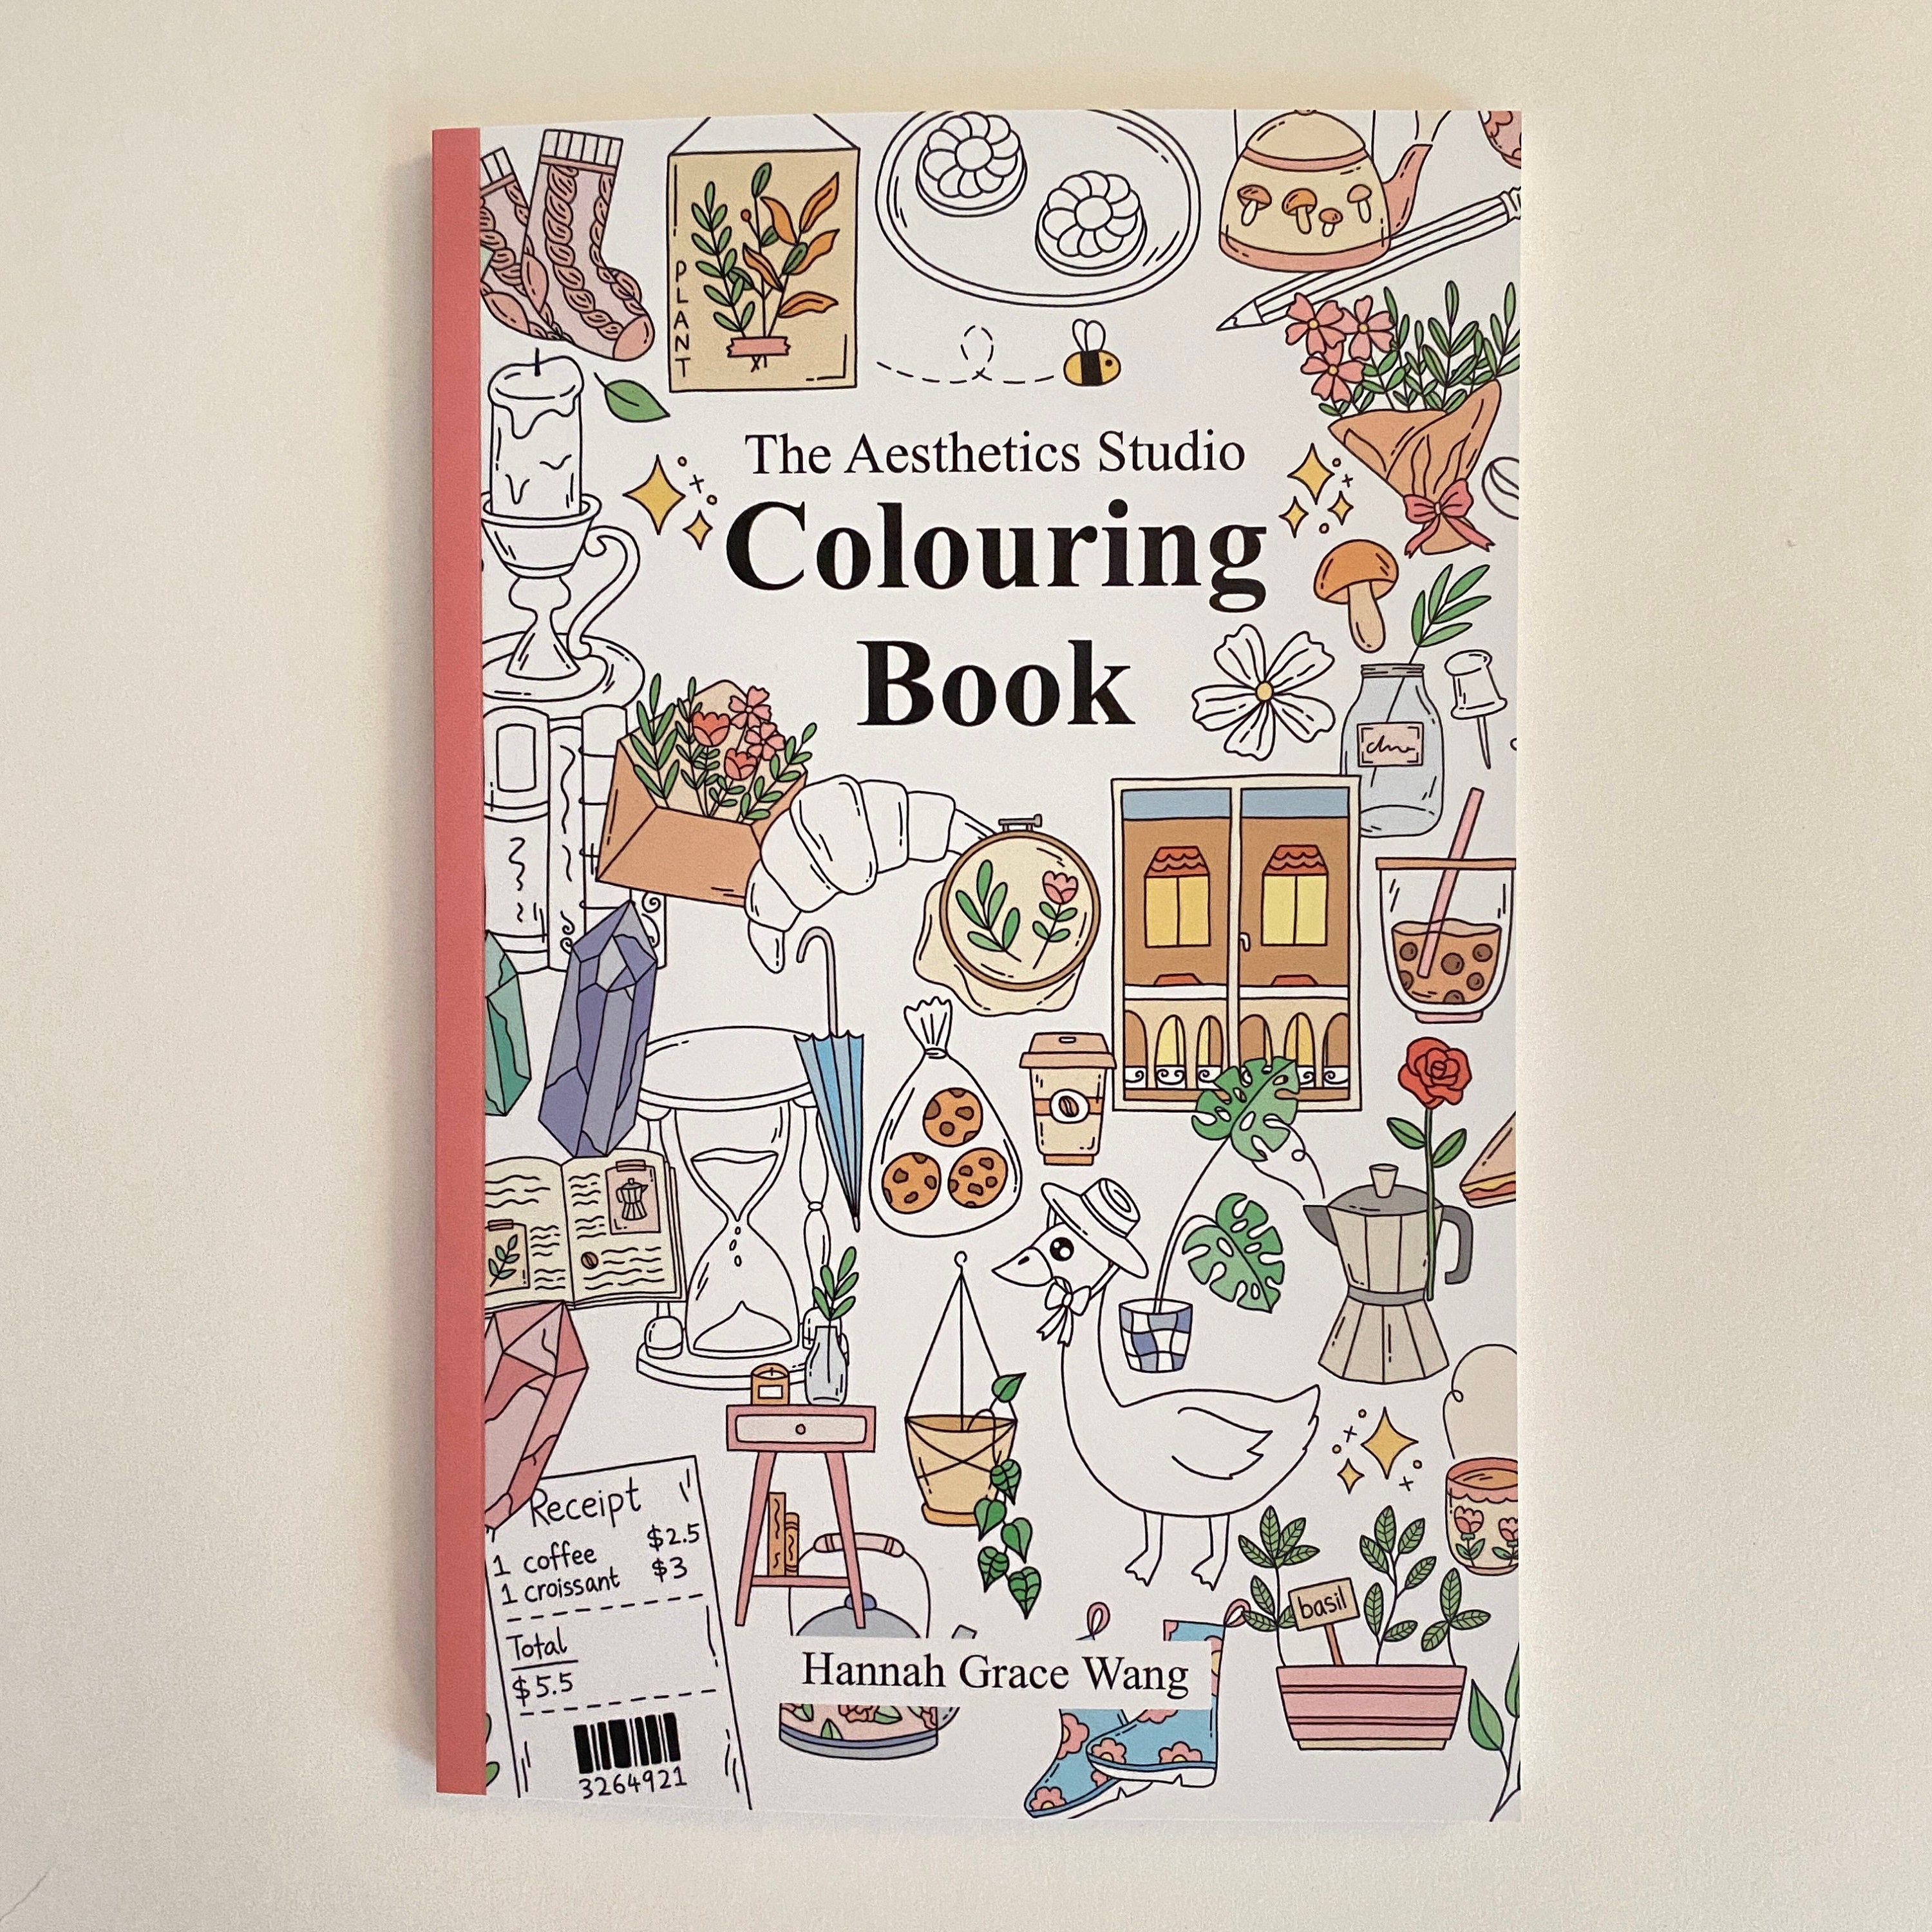 love this page in the new @bobbiegoods! coloring book 🧸✨🪸🕯️🐠 #bobb, bobbie  goods